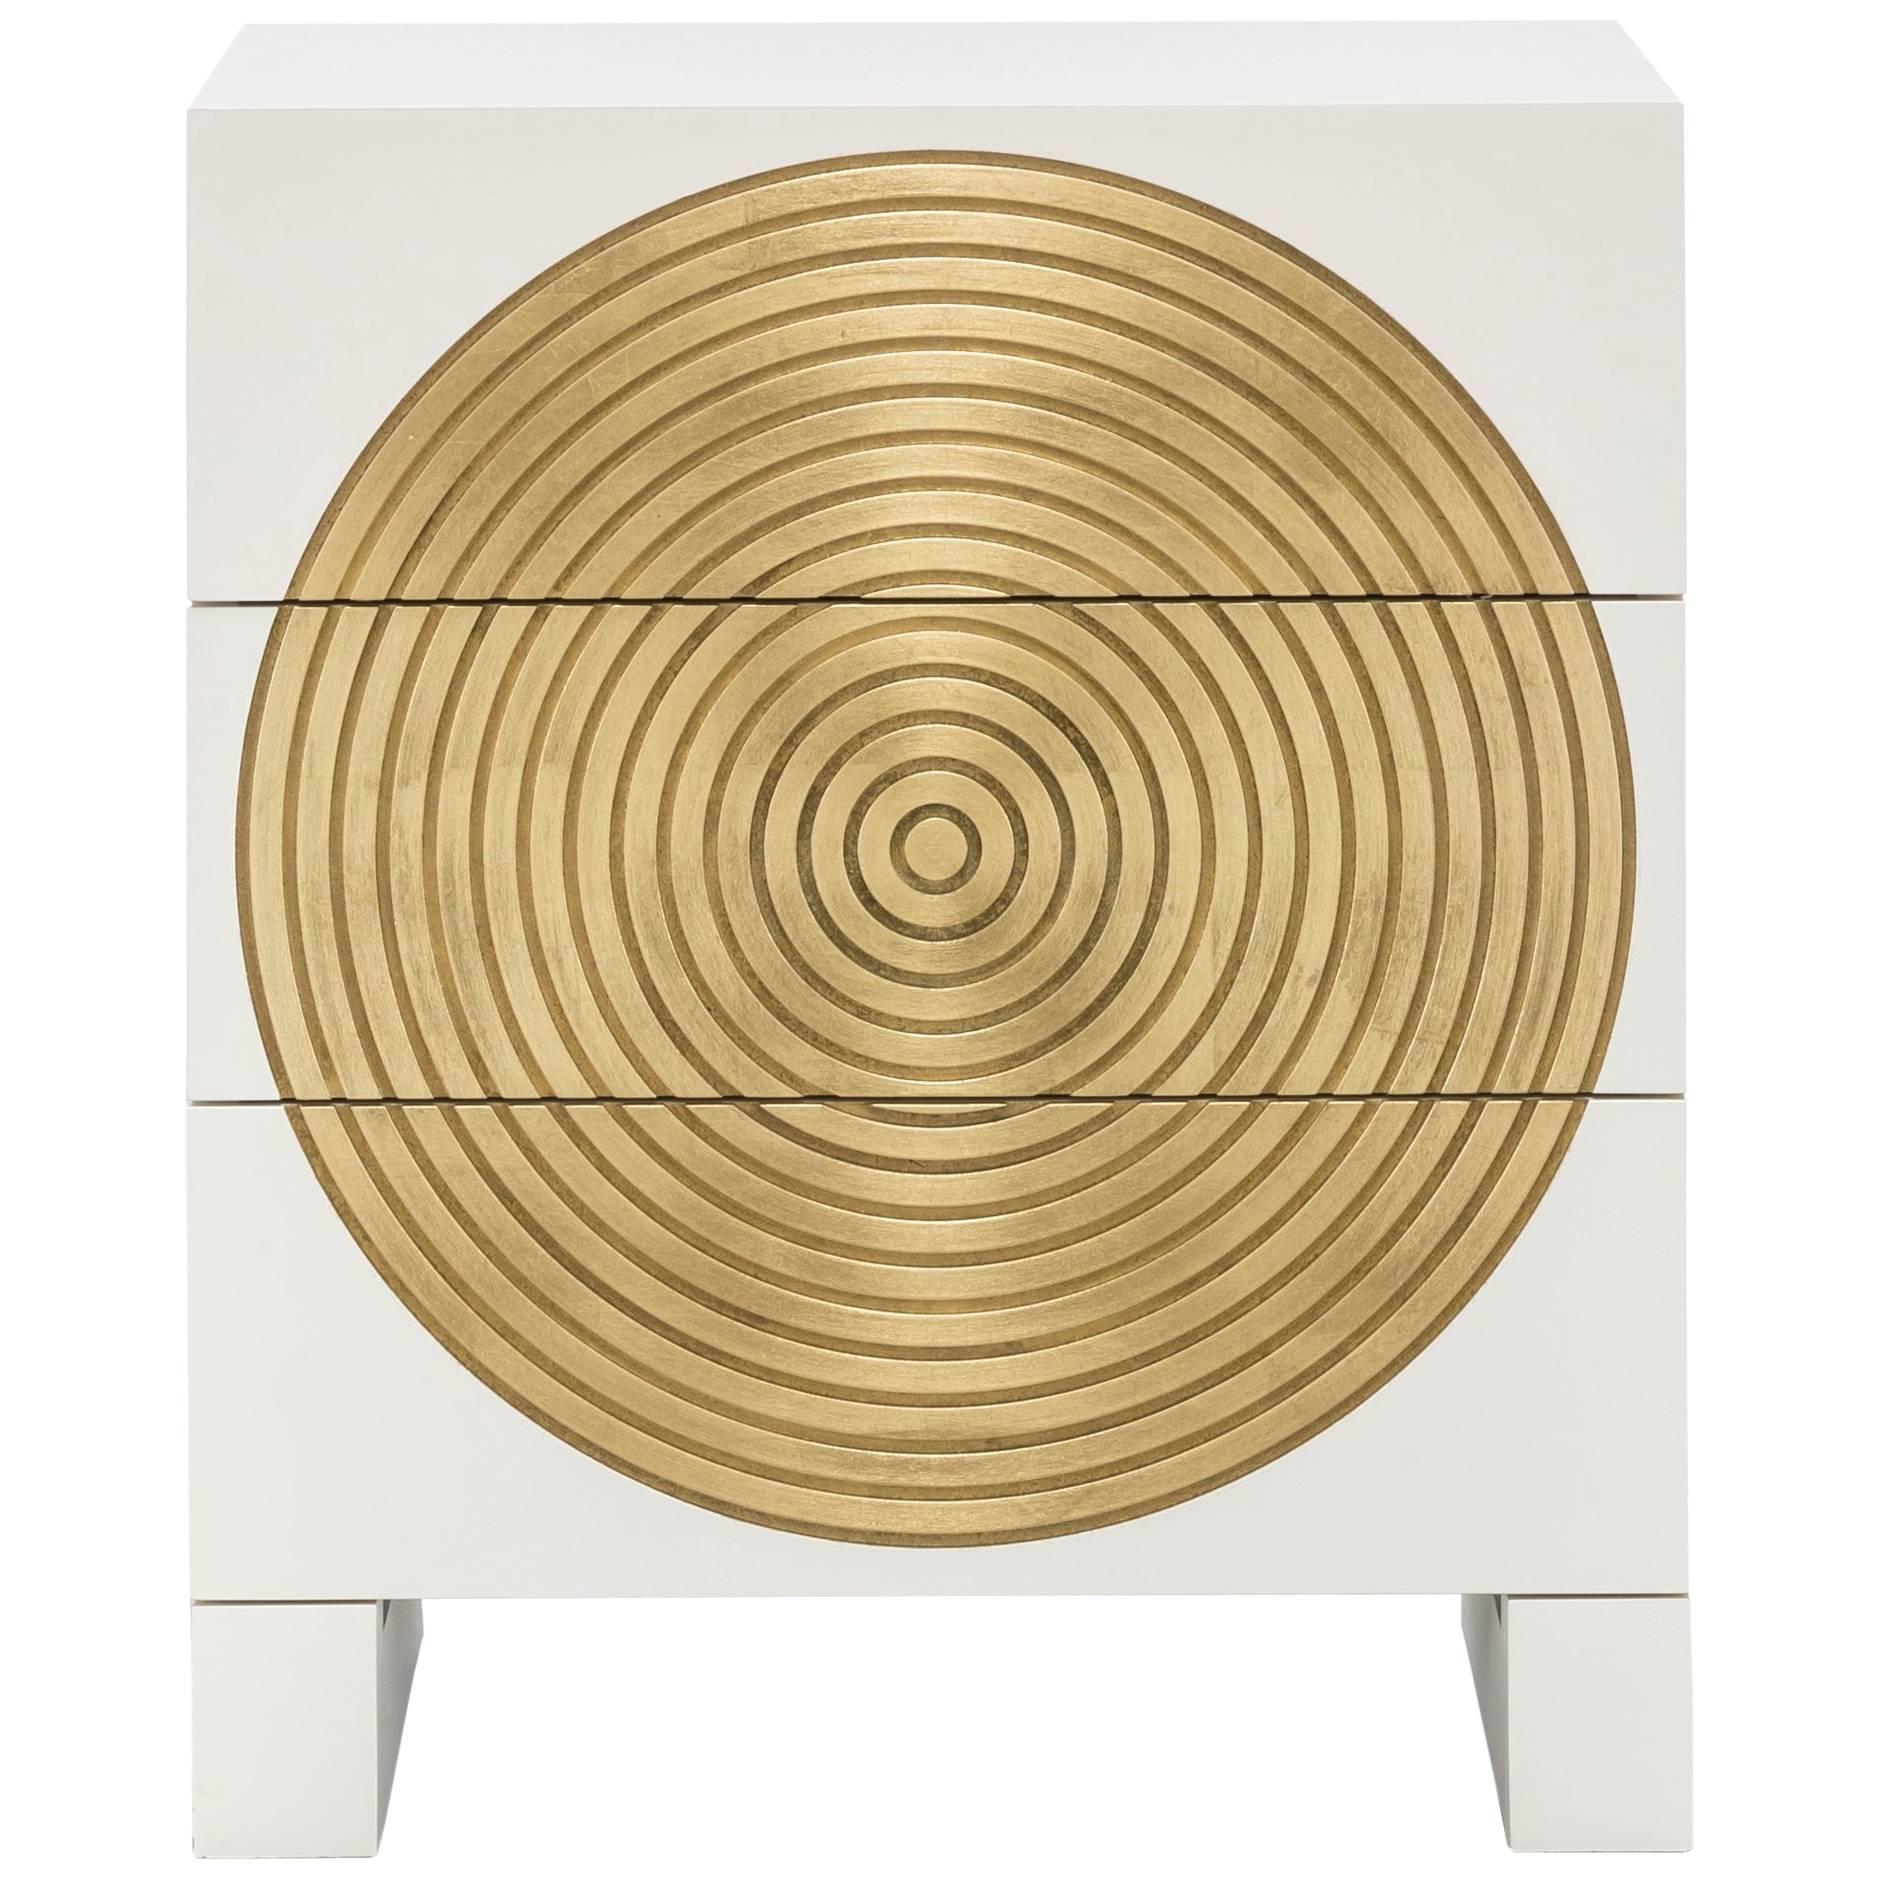 HALO NIGHTSTAND - Modern Nightstand with Circle Design with Gold Leaf Detail